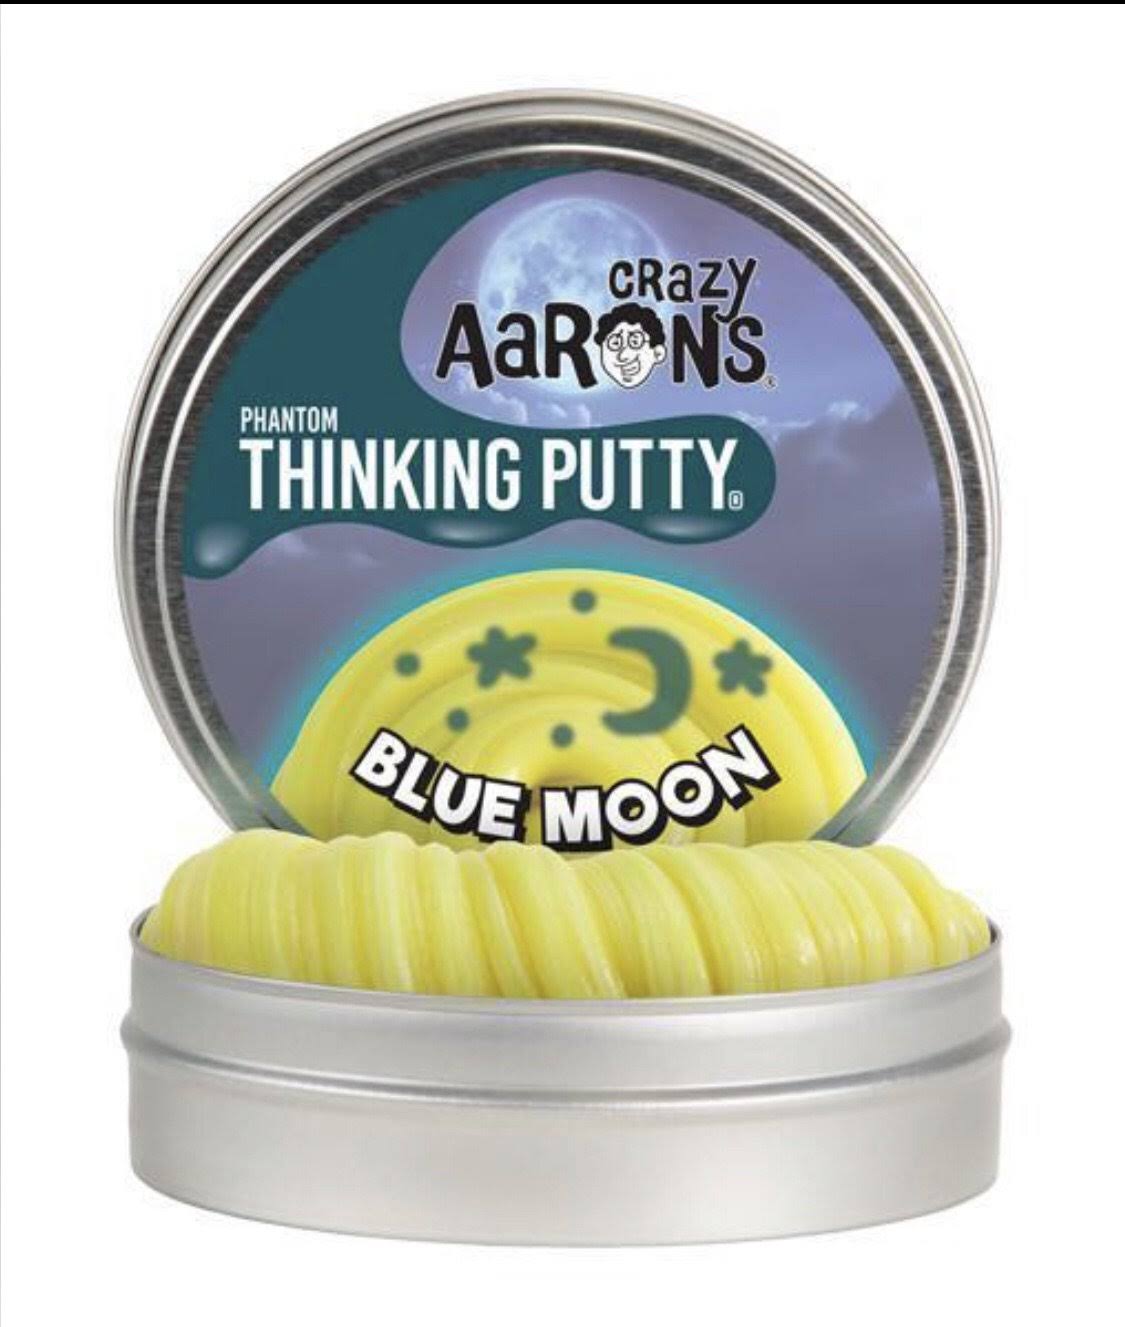 Crazy Aaron's Thinking Putty Blue Moon